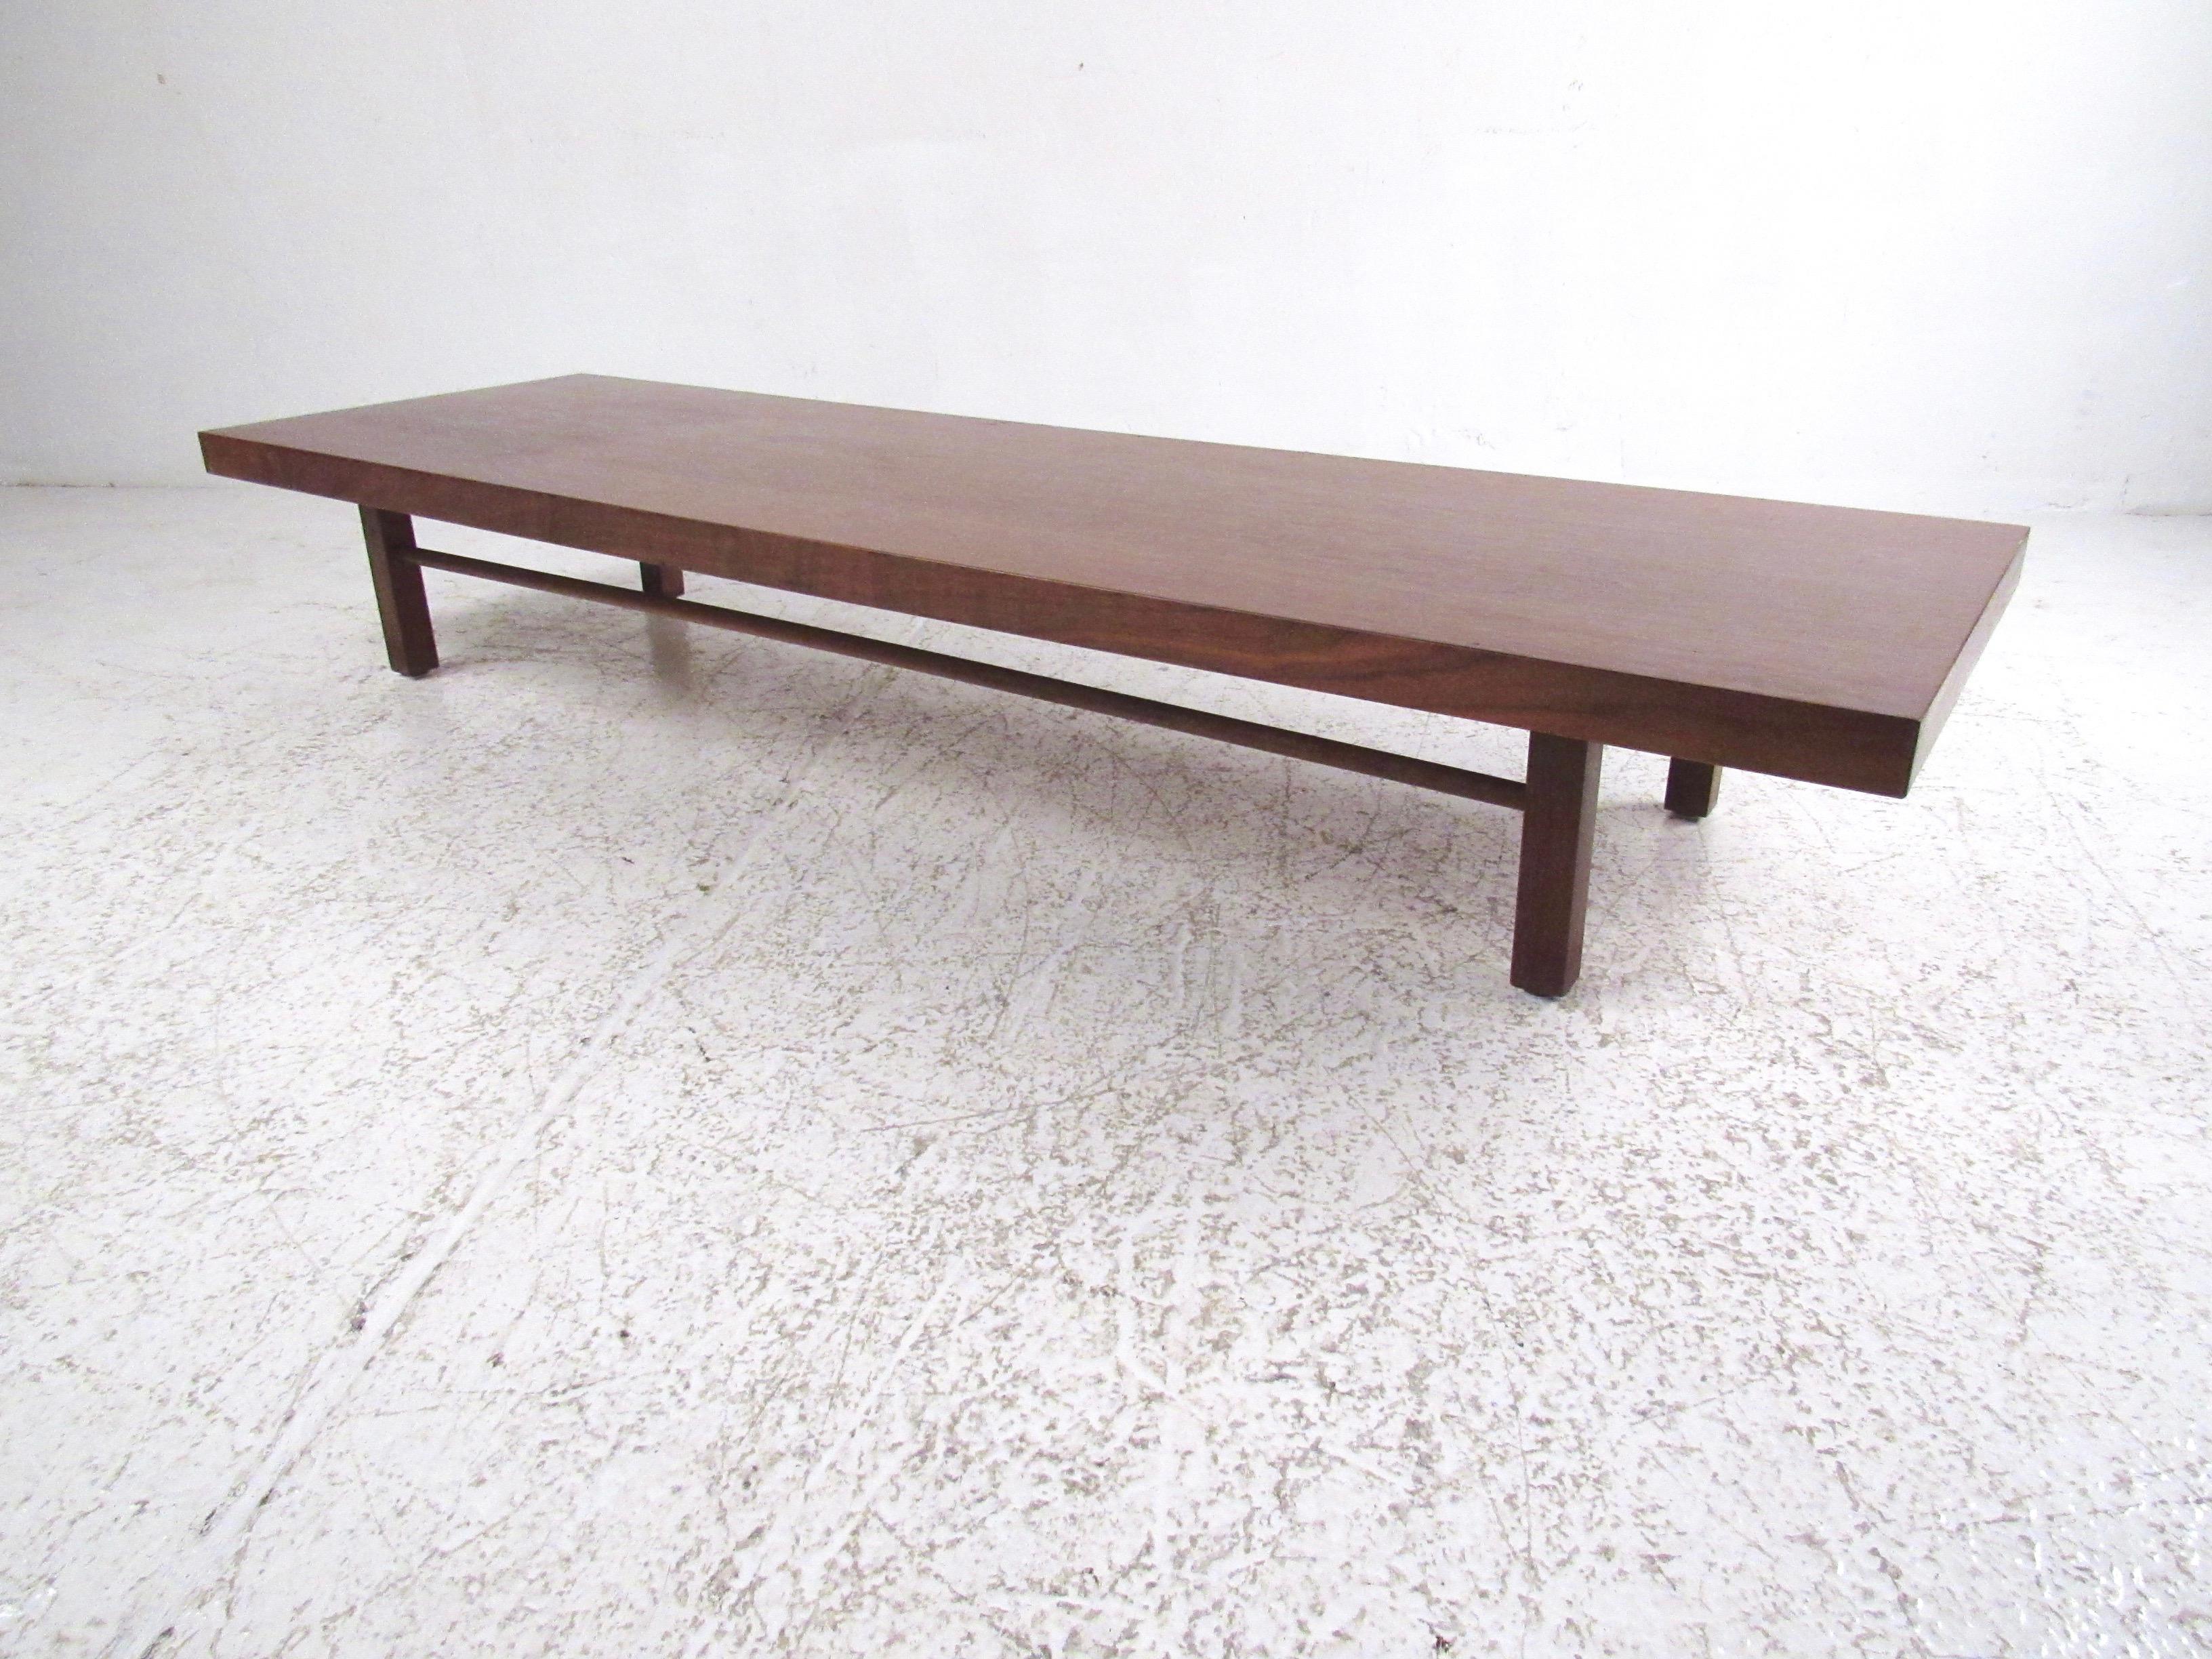 This stylish midcentury cocktail table features a vintage walnut finish with striking modern lines and tapered wooden stretchers. Designed by Milo Baughman for Thayer Coggin the sleek vintage modern design of this long low coffee table makes the